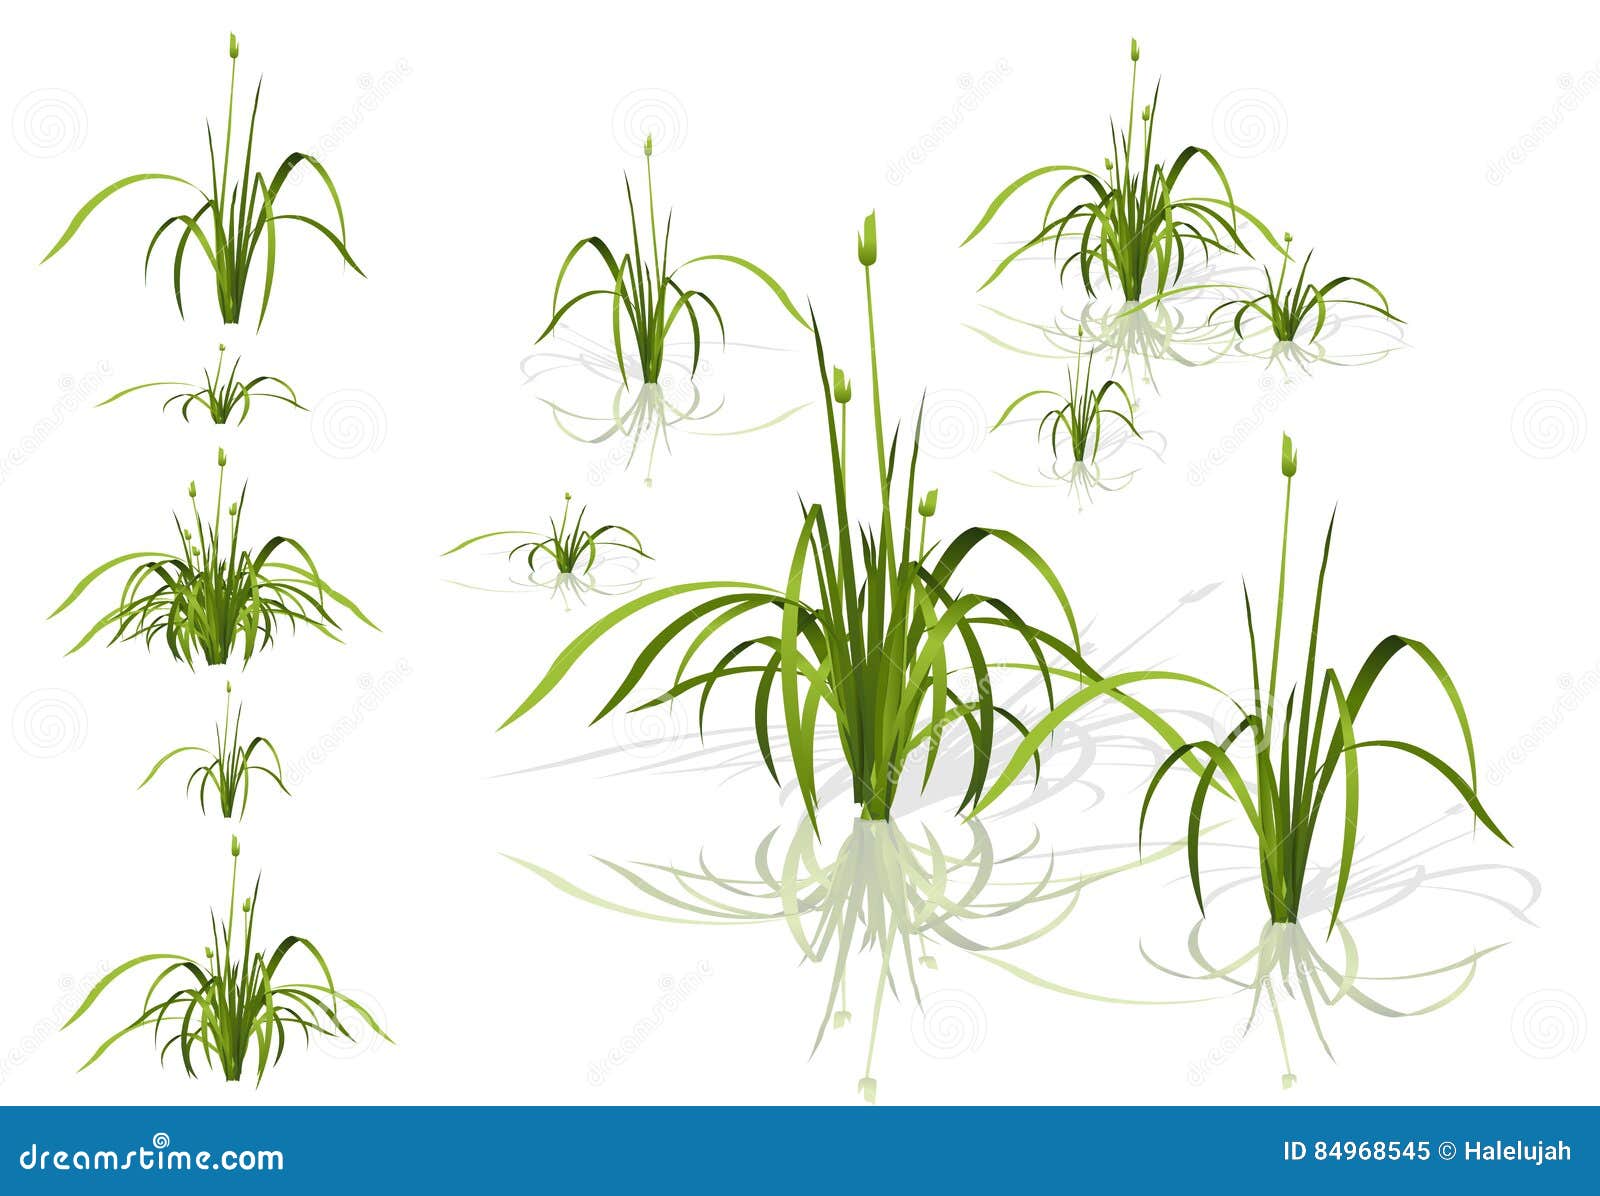  reed. water plants in different variants with shadows.